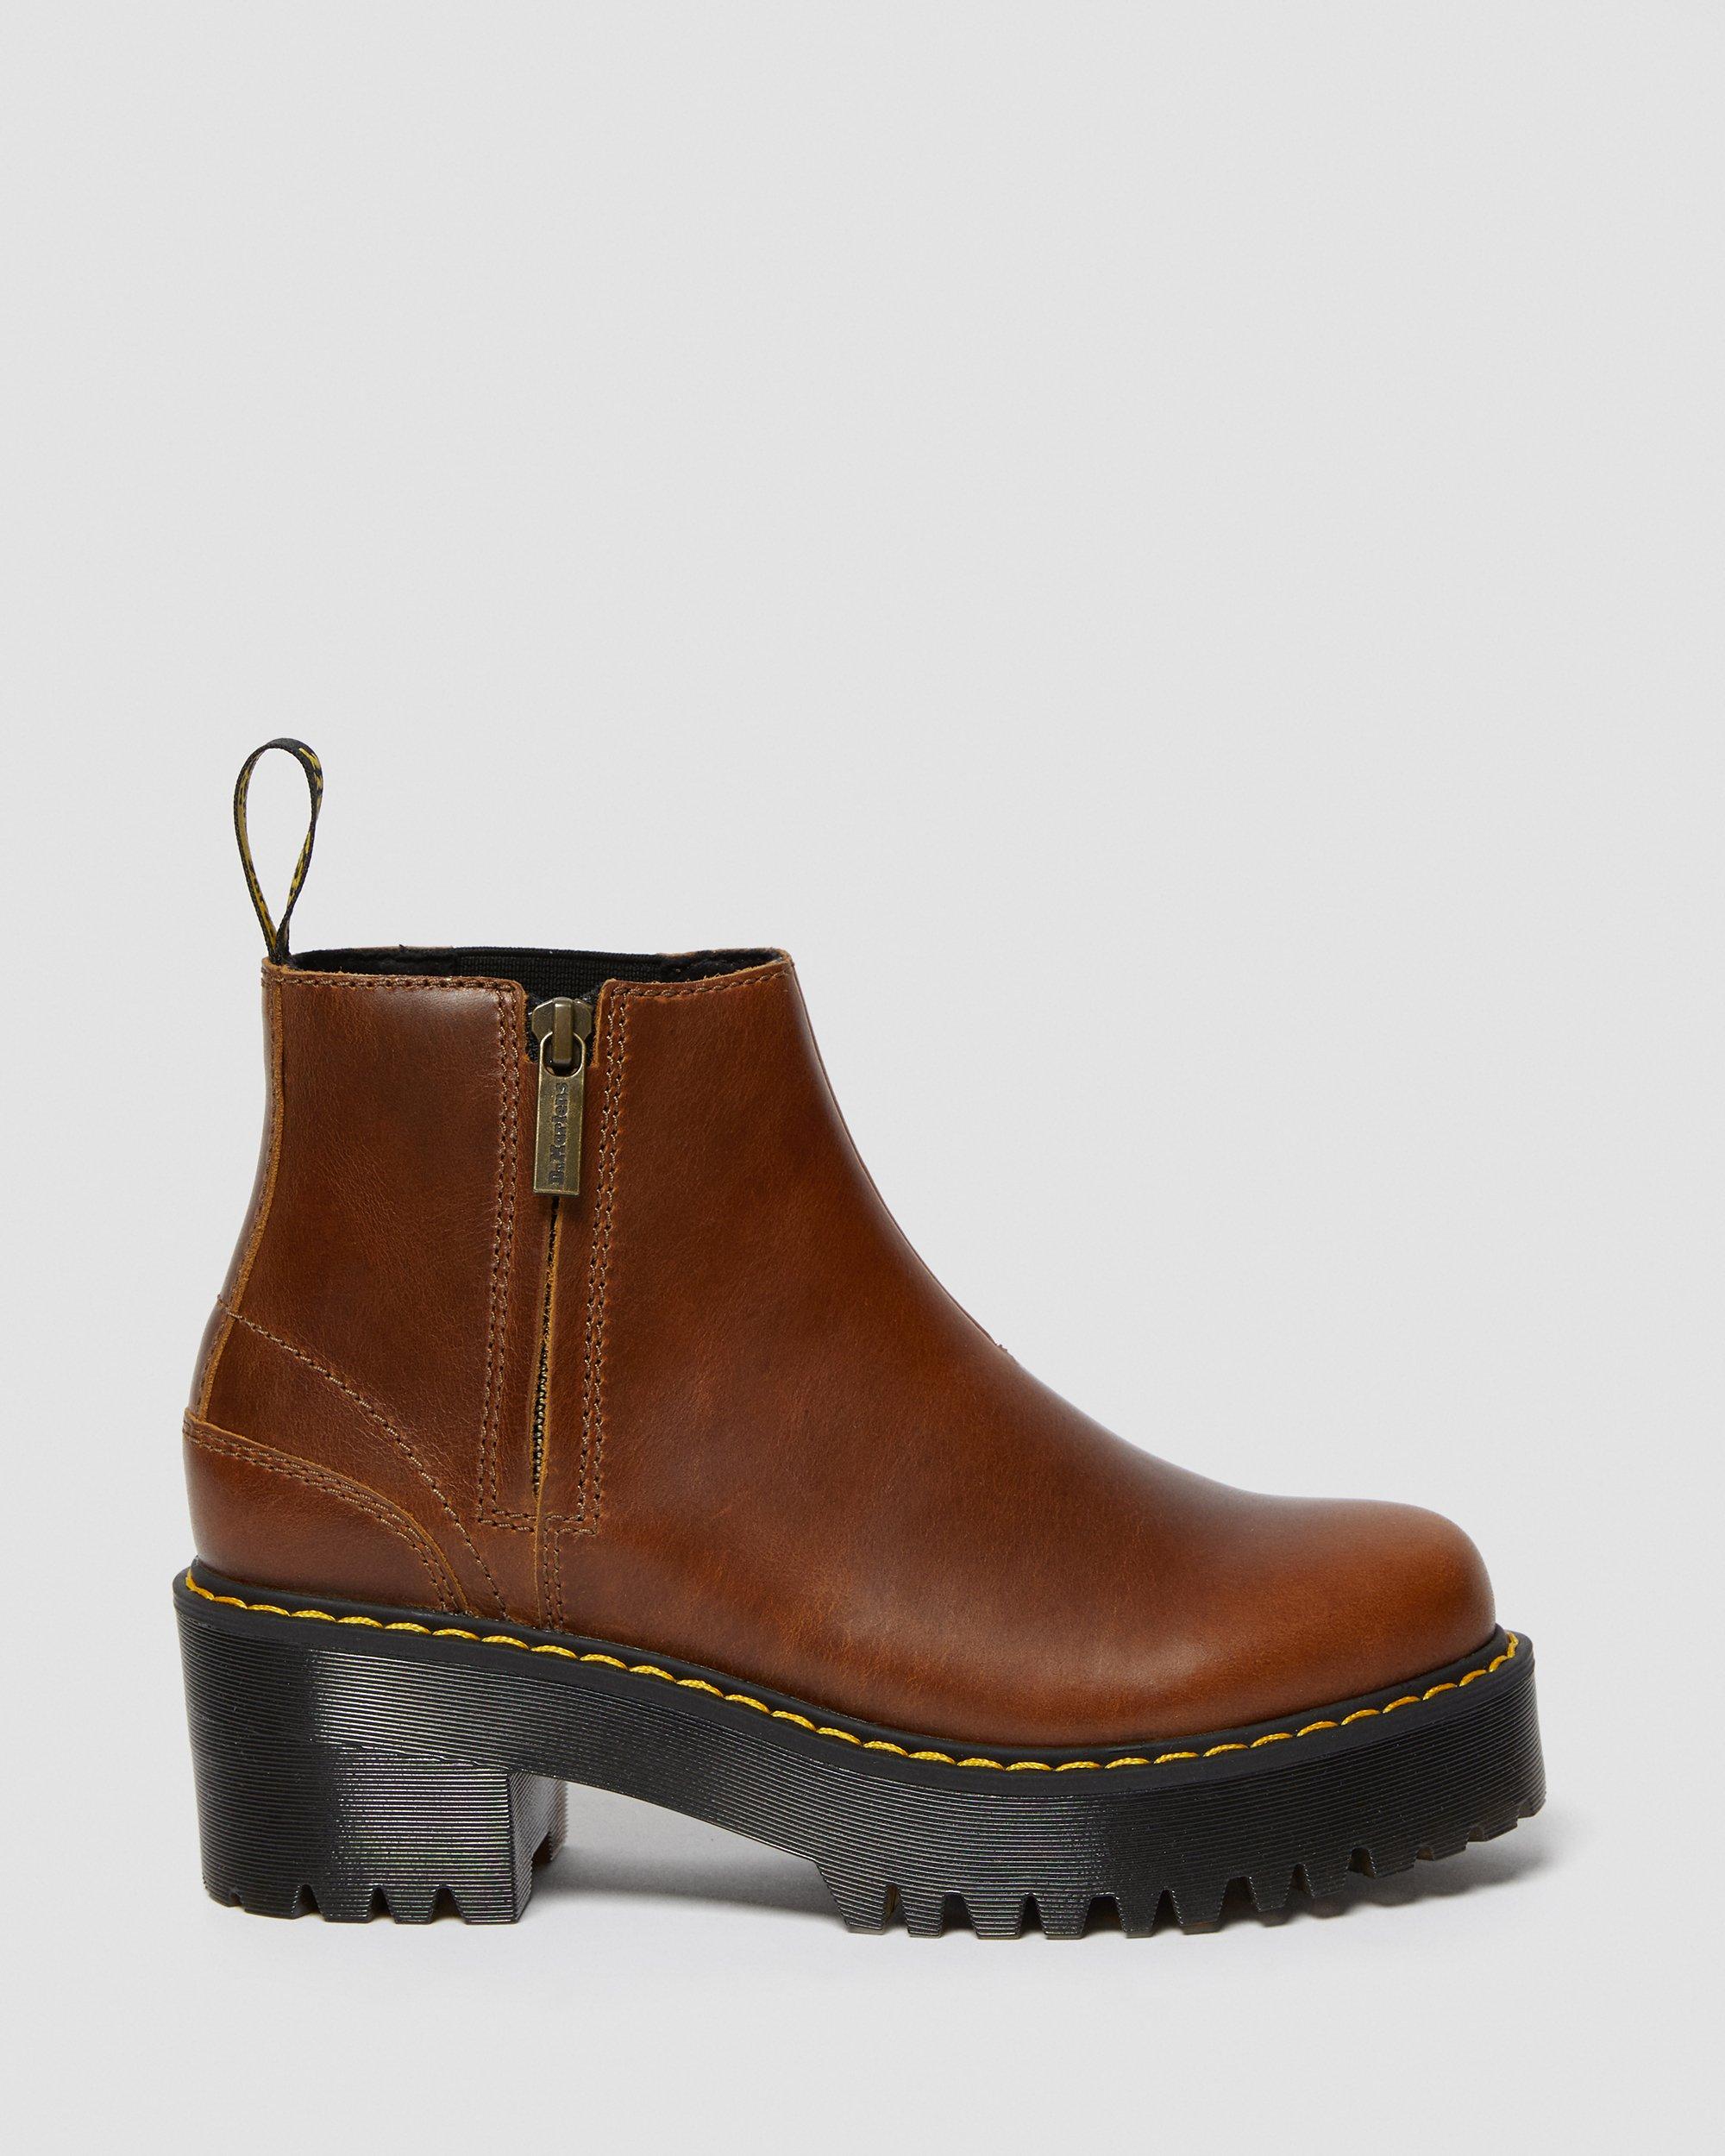 DR MARTENS Rometty Women's Leather Chelsea Boots